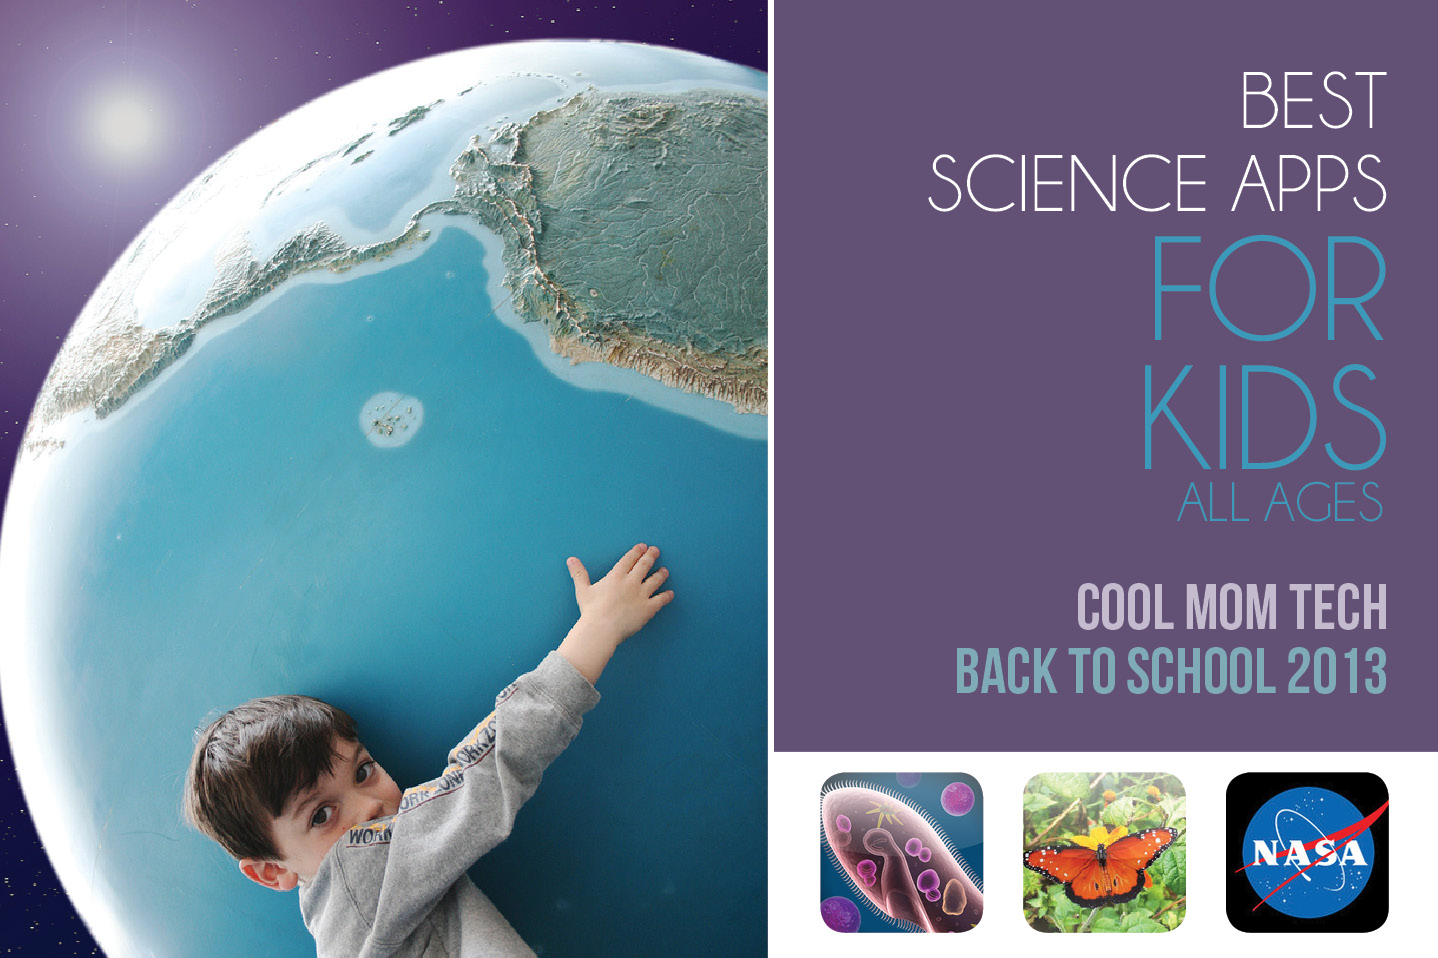 The best science apps for kids: Back to School Tech Guide 2013